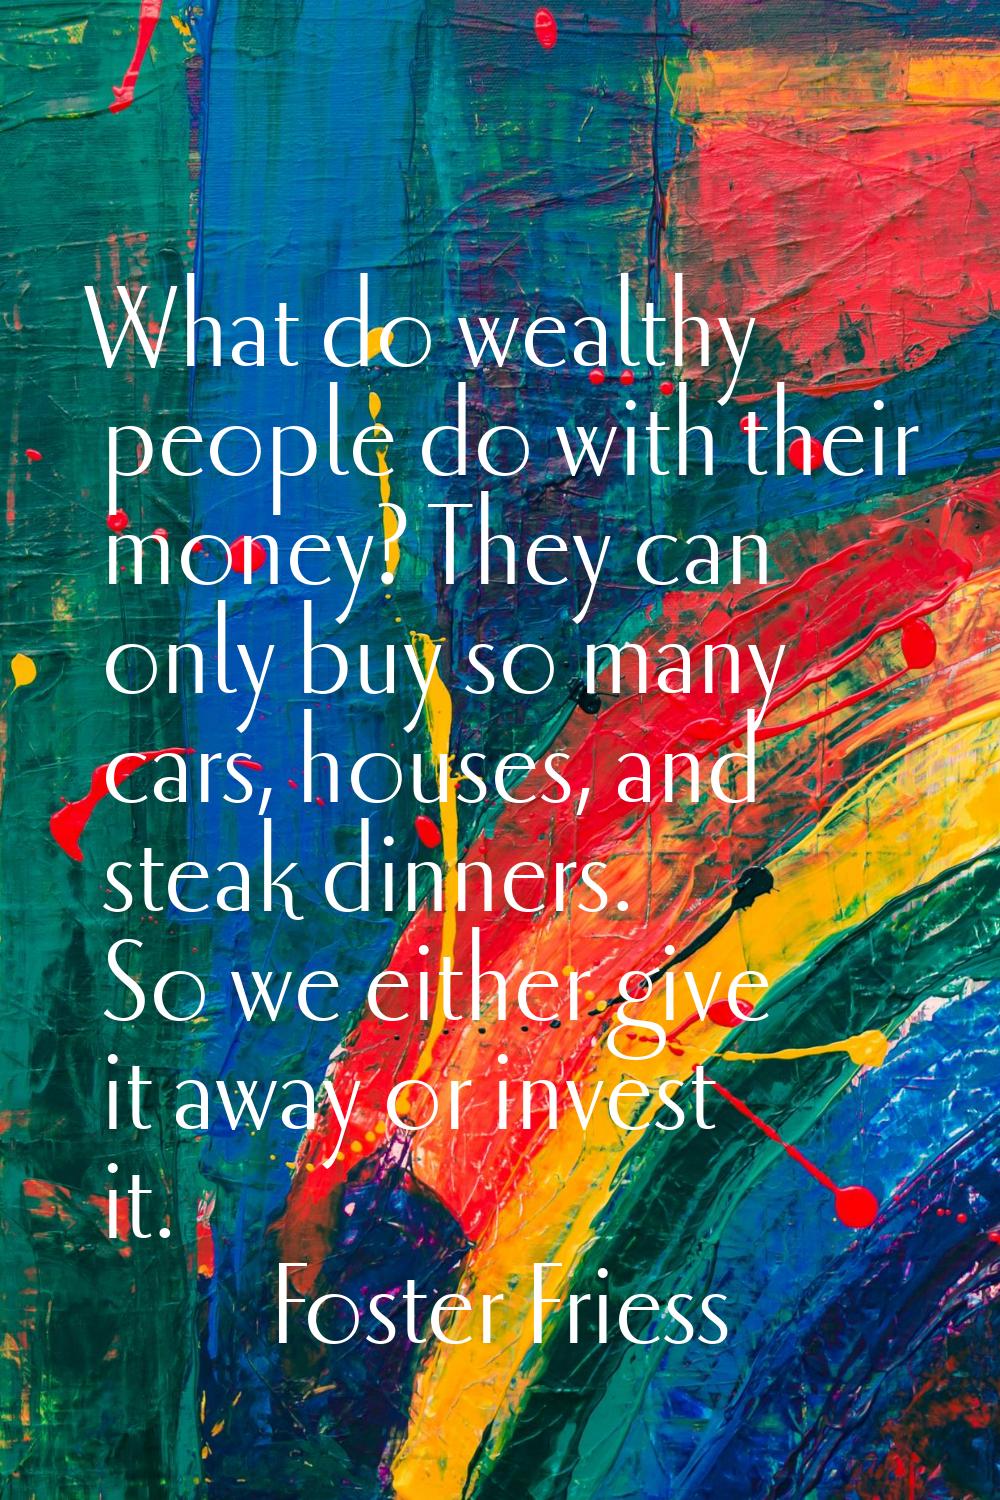 What do wealthy people do with their money? They can only buy so many cars, houses, and steak dinne